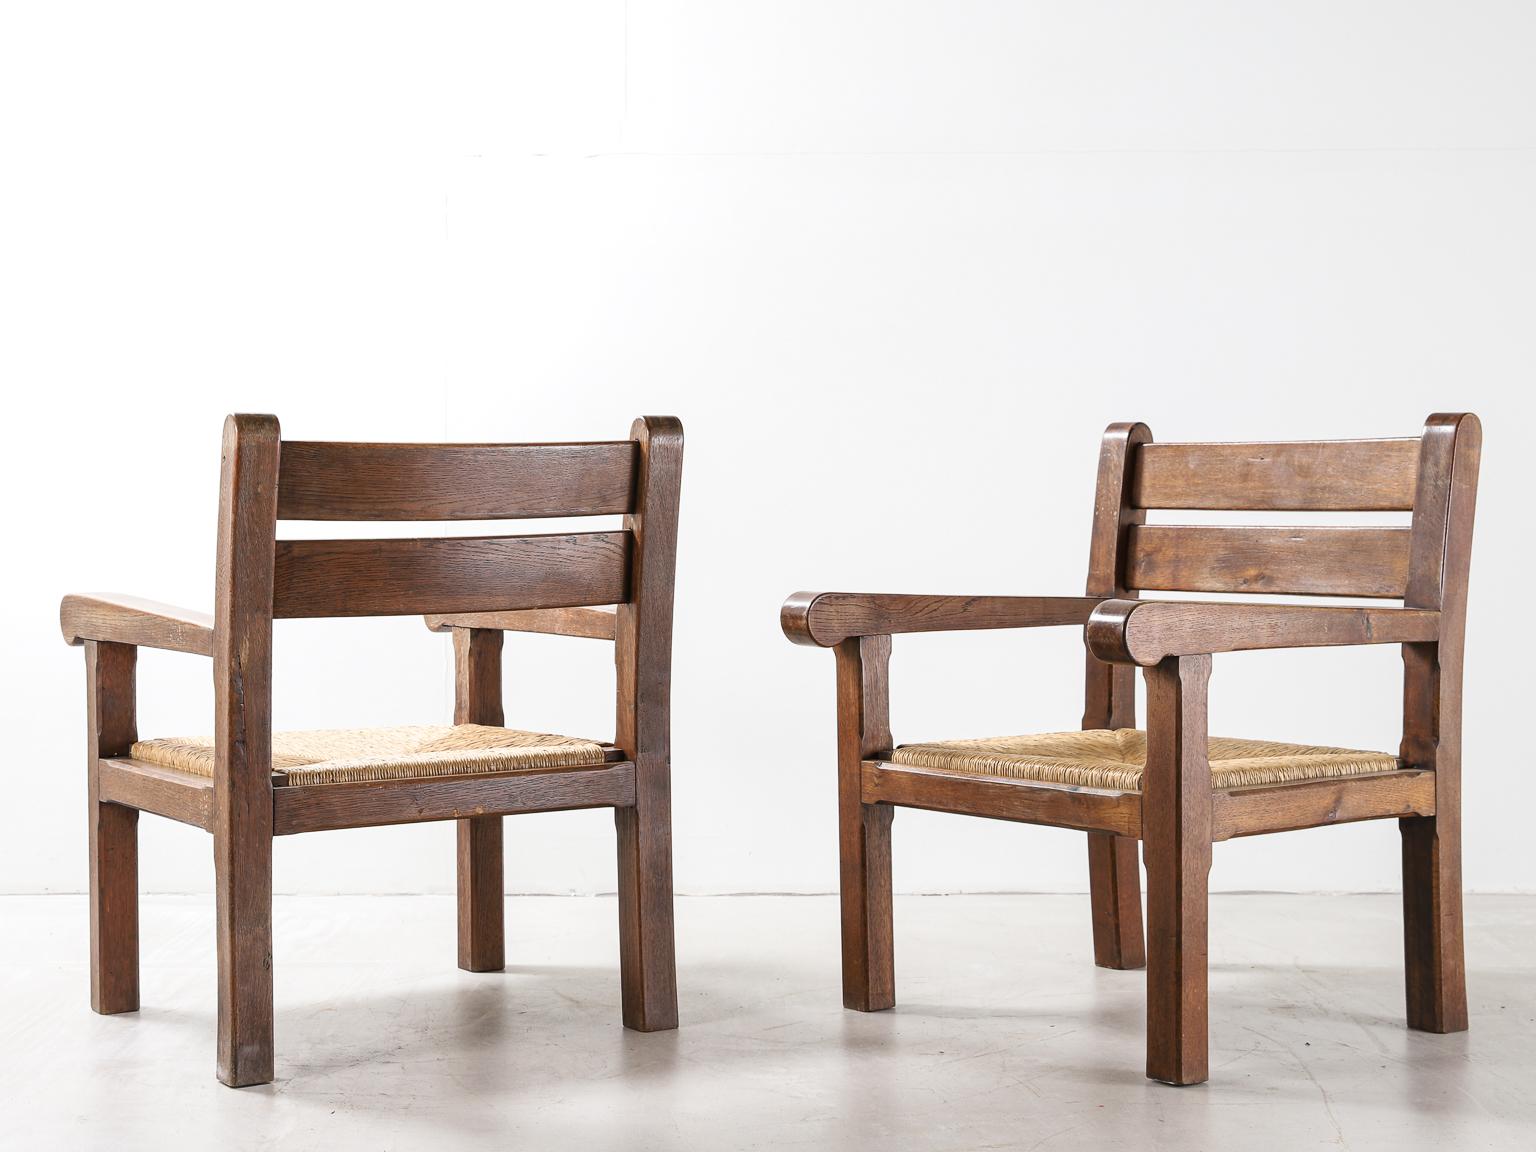 A beautifully simple pair of armchairs made by a French Breton cabinetmaker in the 1950s. The elegant mid to dark oak frames are complimented by the natural, original braided straw seats.